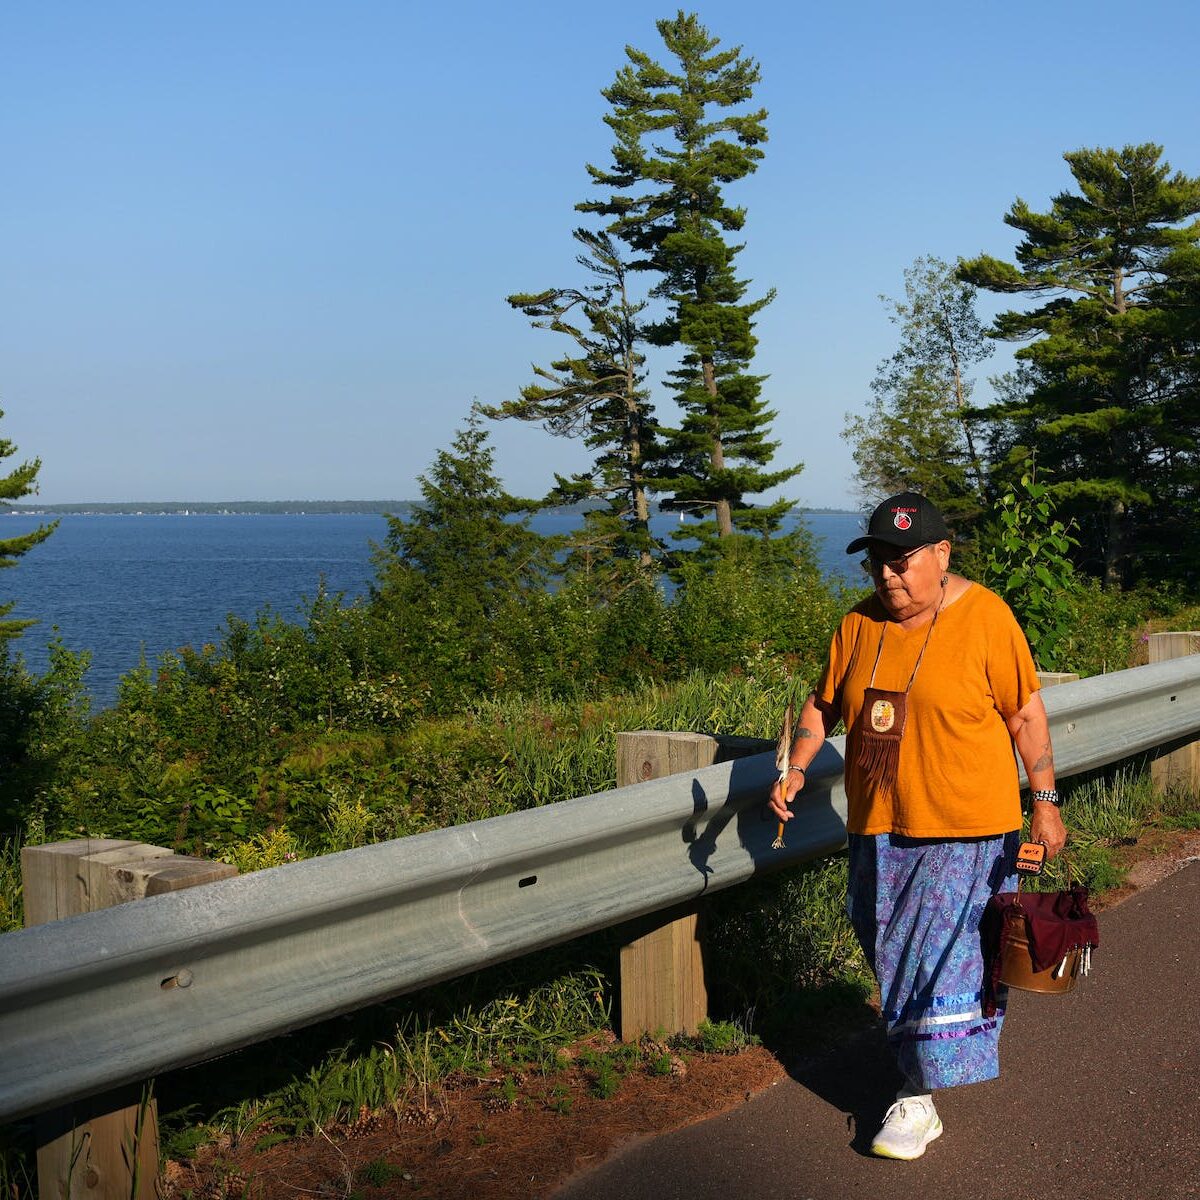  Indigenous advocate Sharon Day, leader of the Lake Superior Nibi Walk, carries the water pail near Bayfield, Wis. “We have never spilled the water, and we are never going to spill the water,” she said of her 20 years of walks. Photo by Anthony Souffle, Star Tribune.